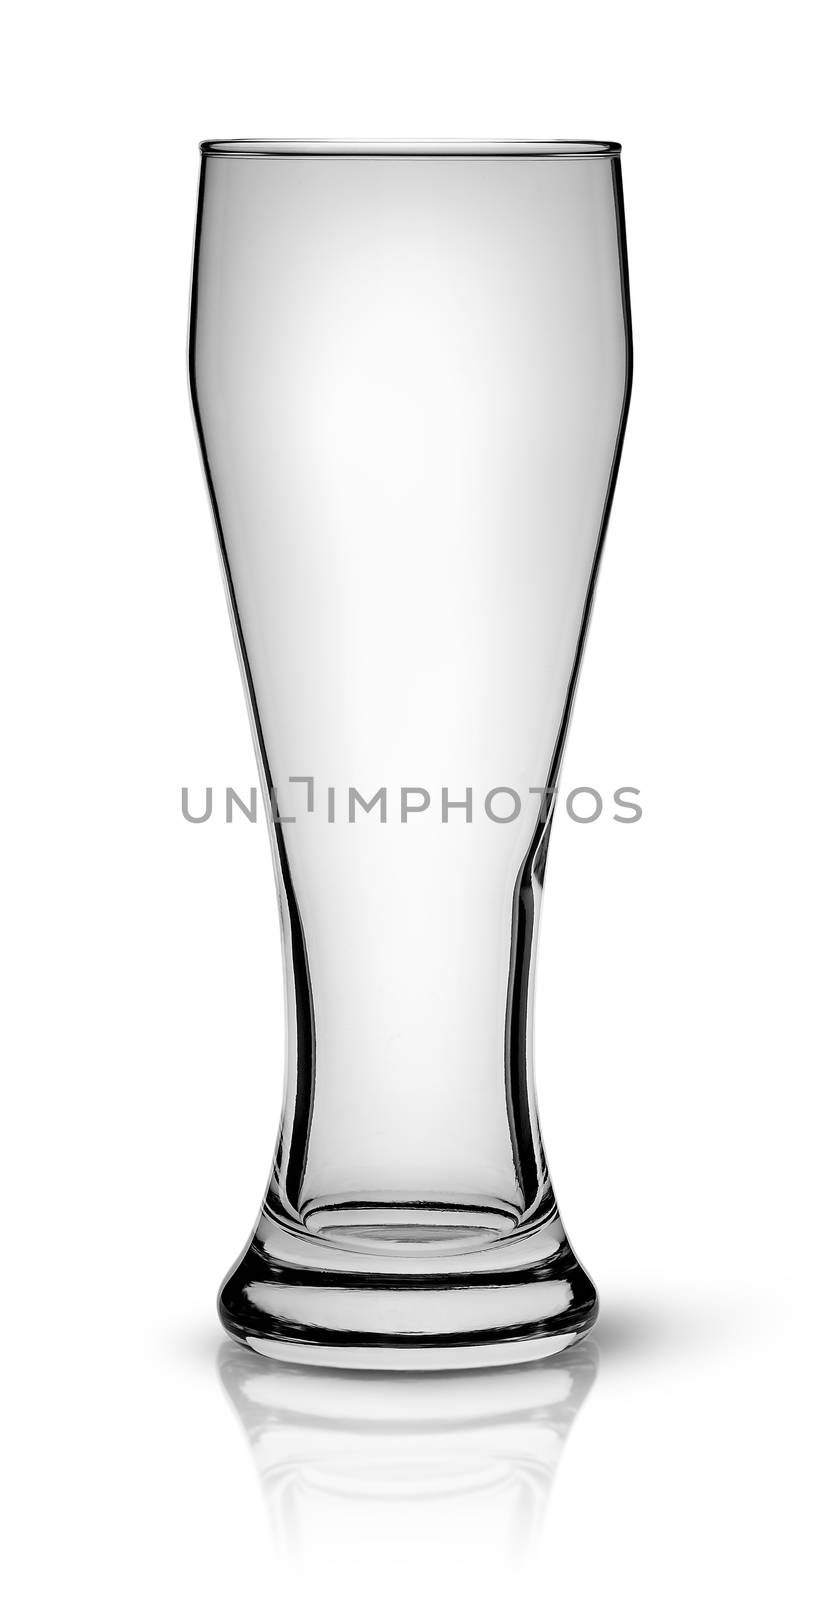 In front empty beer glass by Cipariss